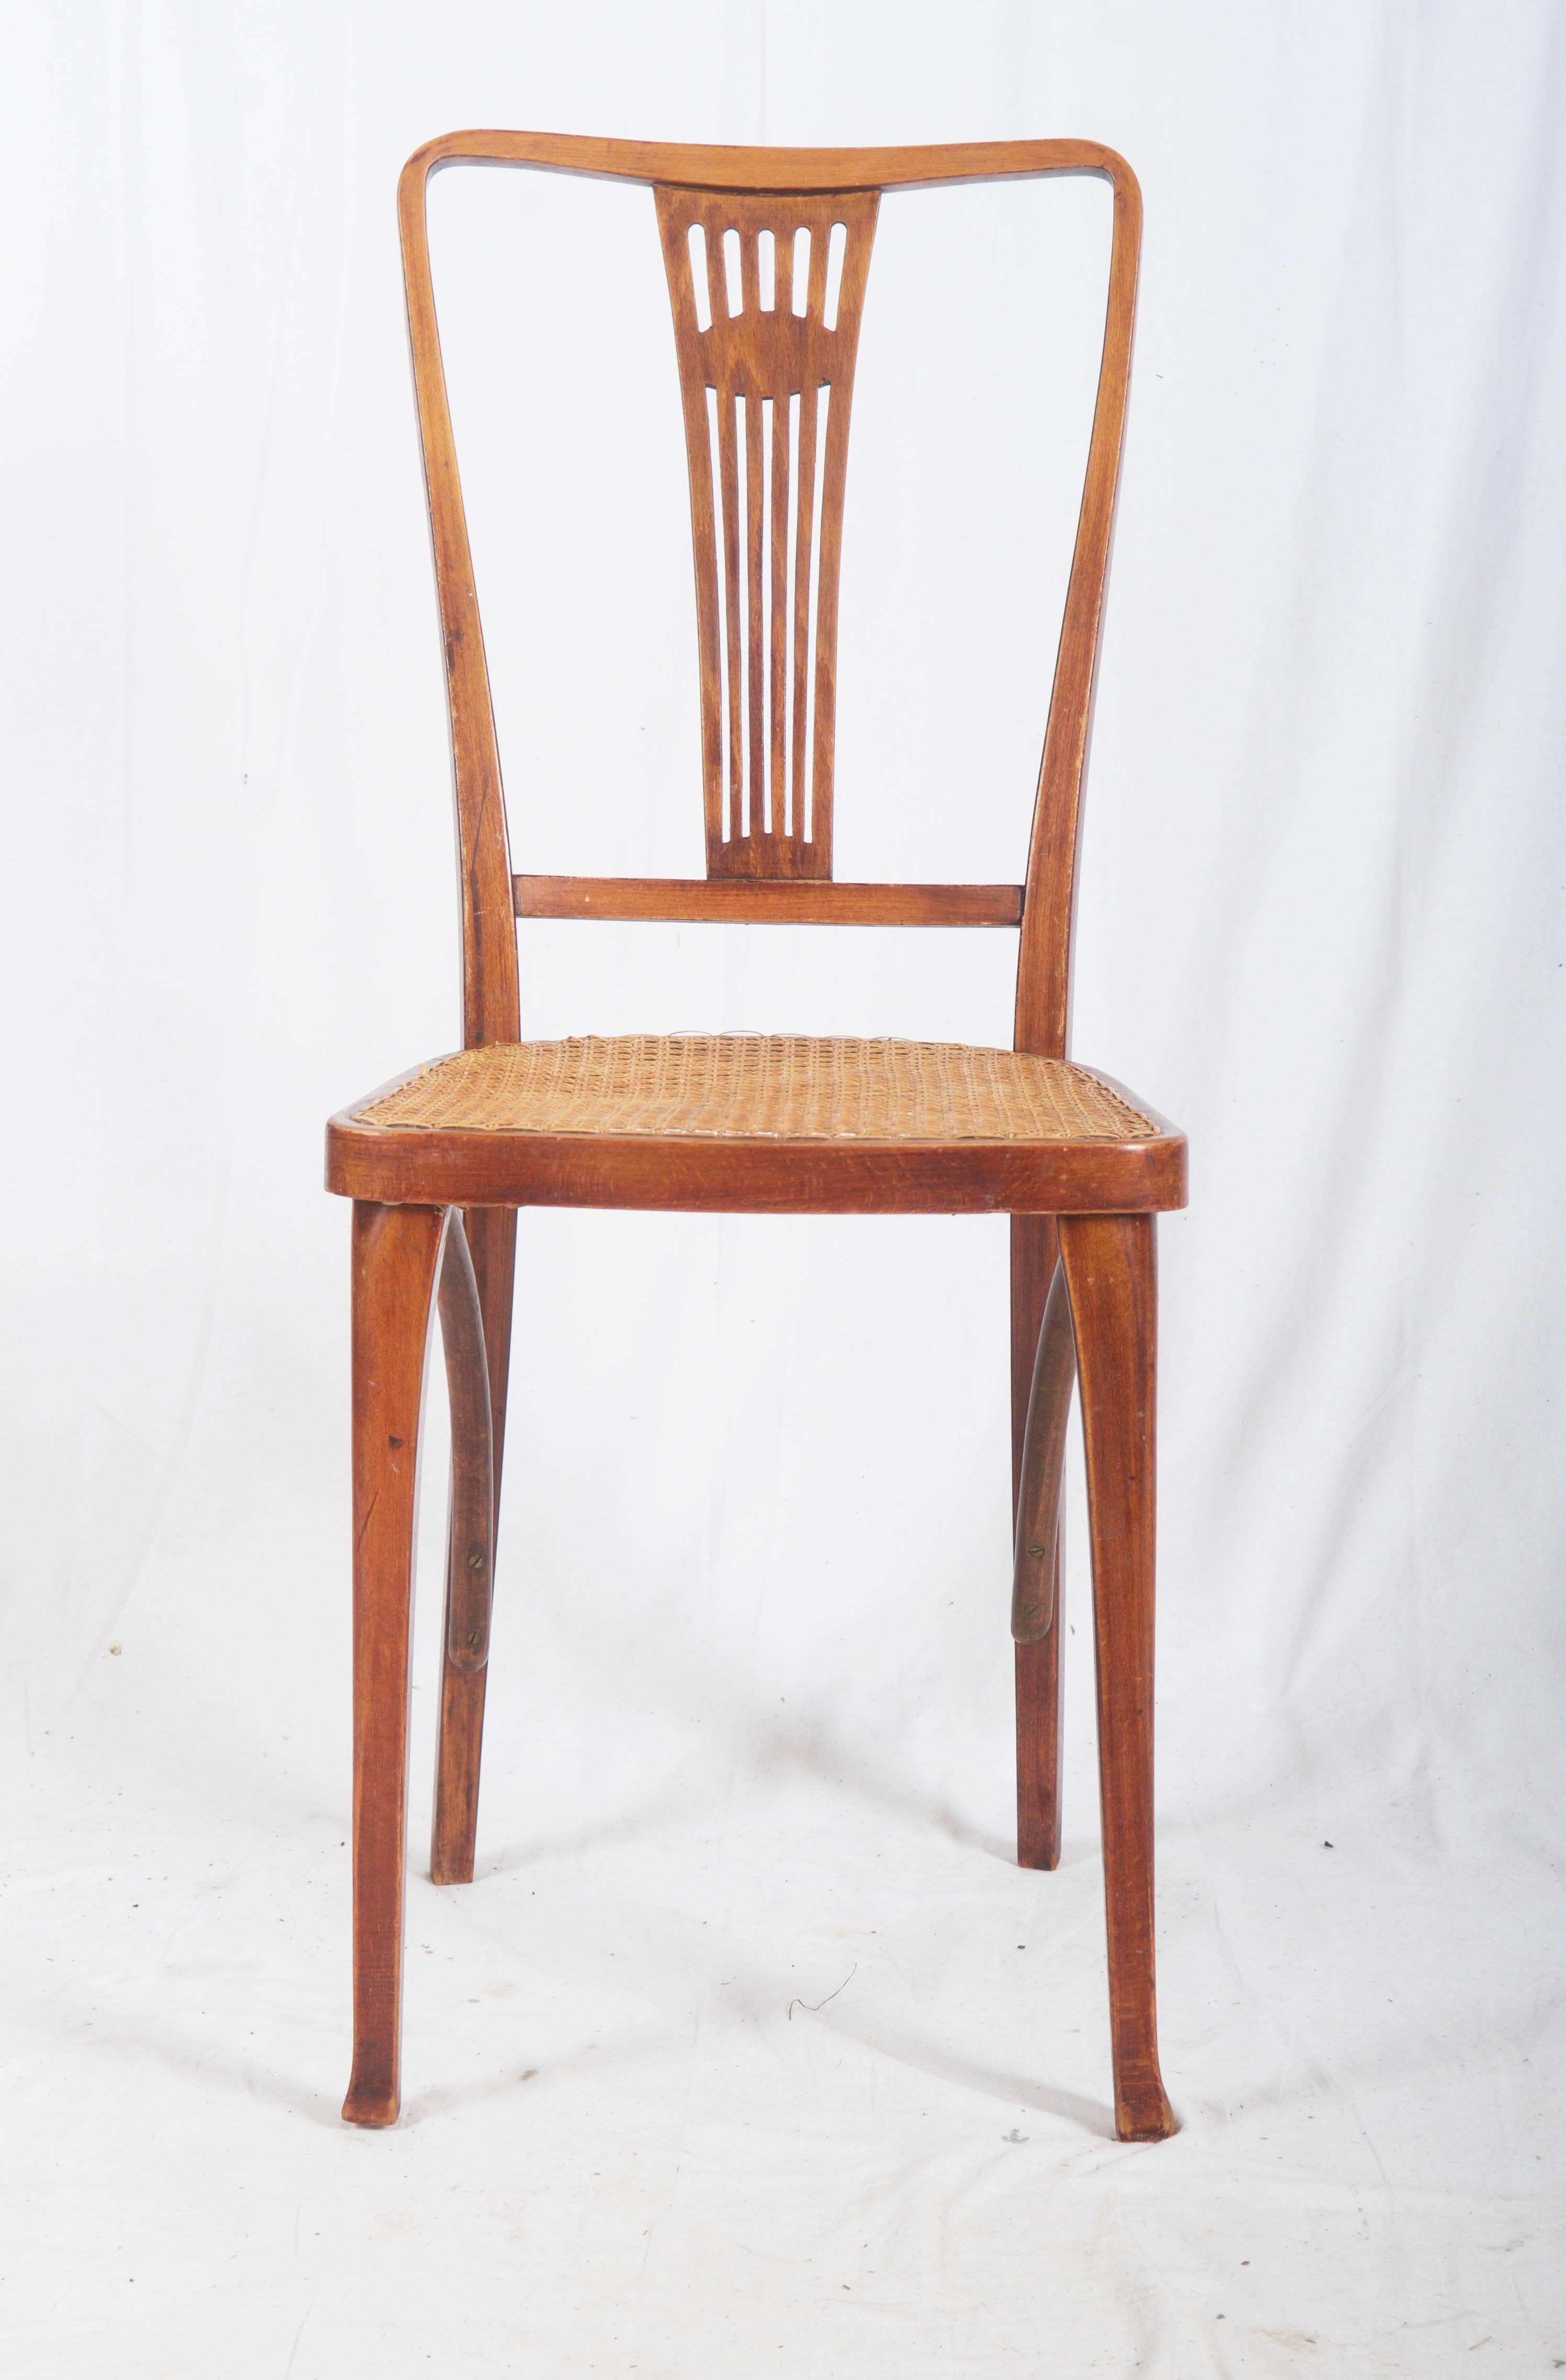 Thonet chairs with caned seat (new canning).
Professionally restored with new canning
up to three pieces available.